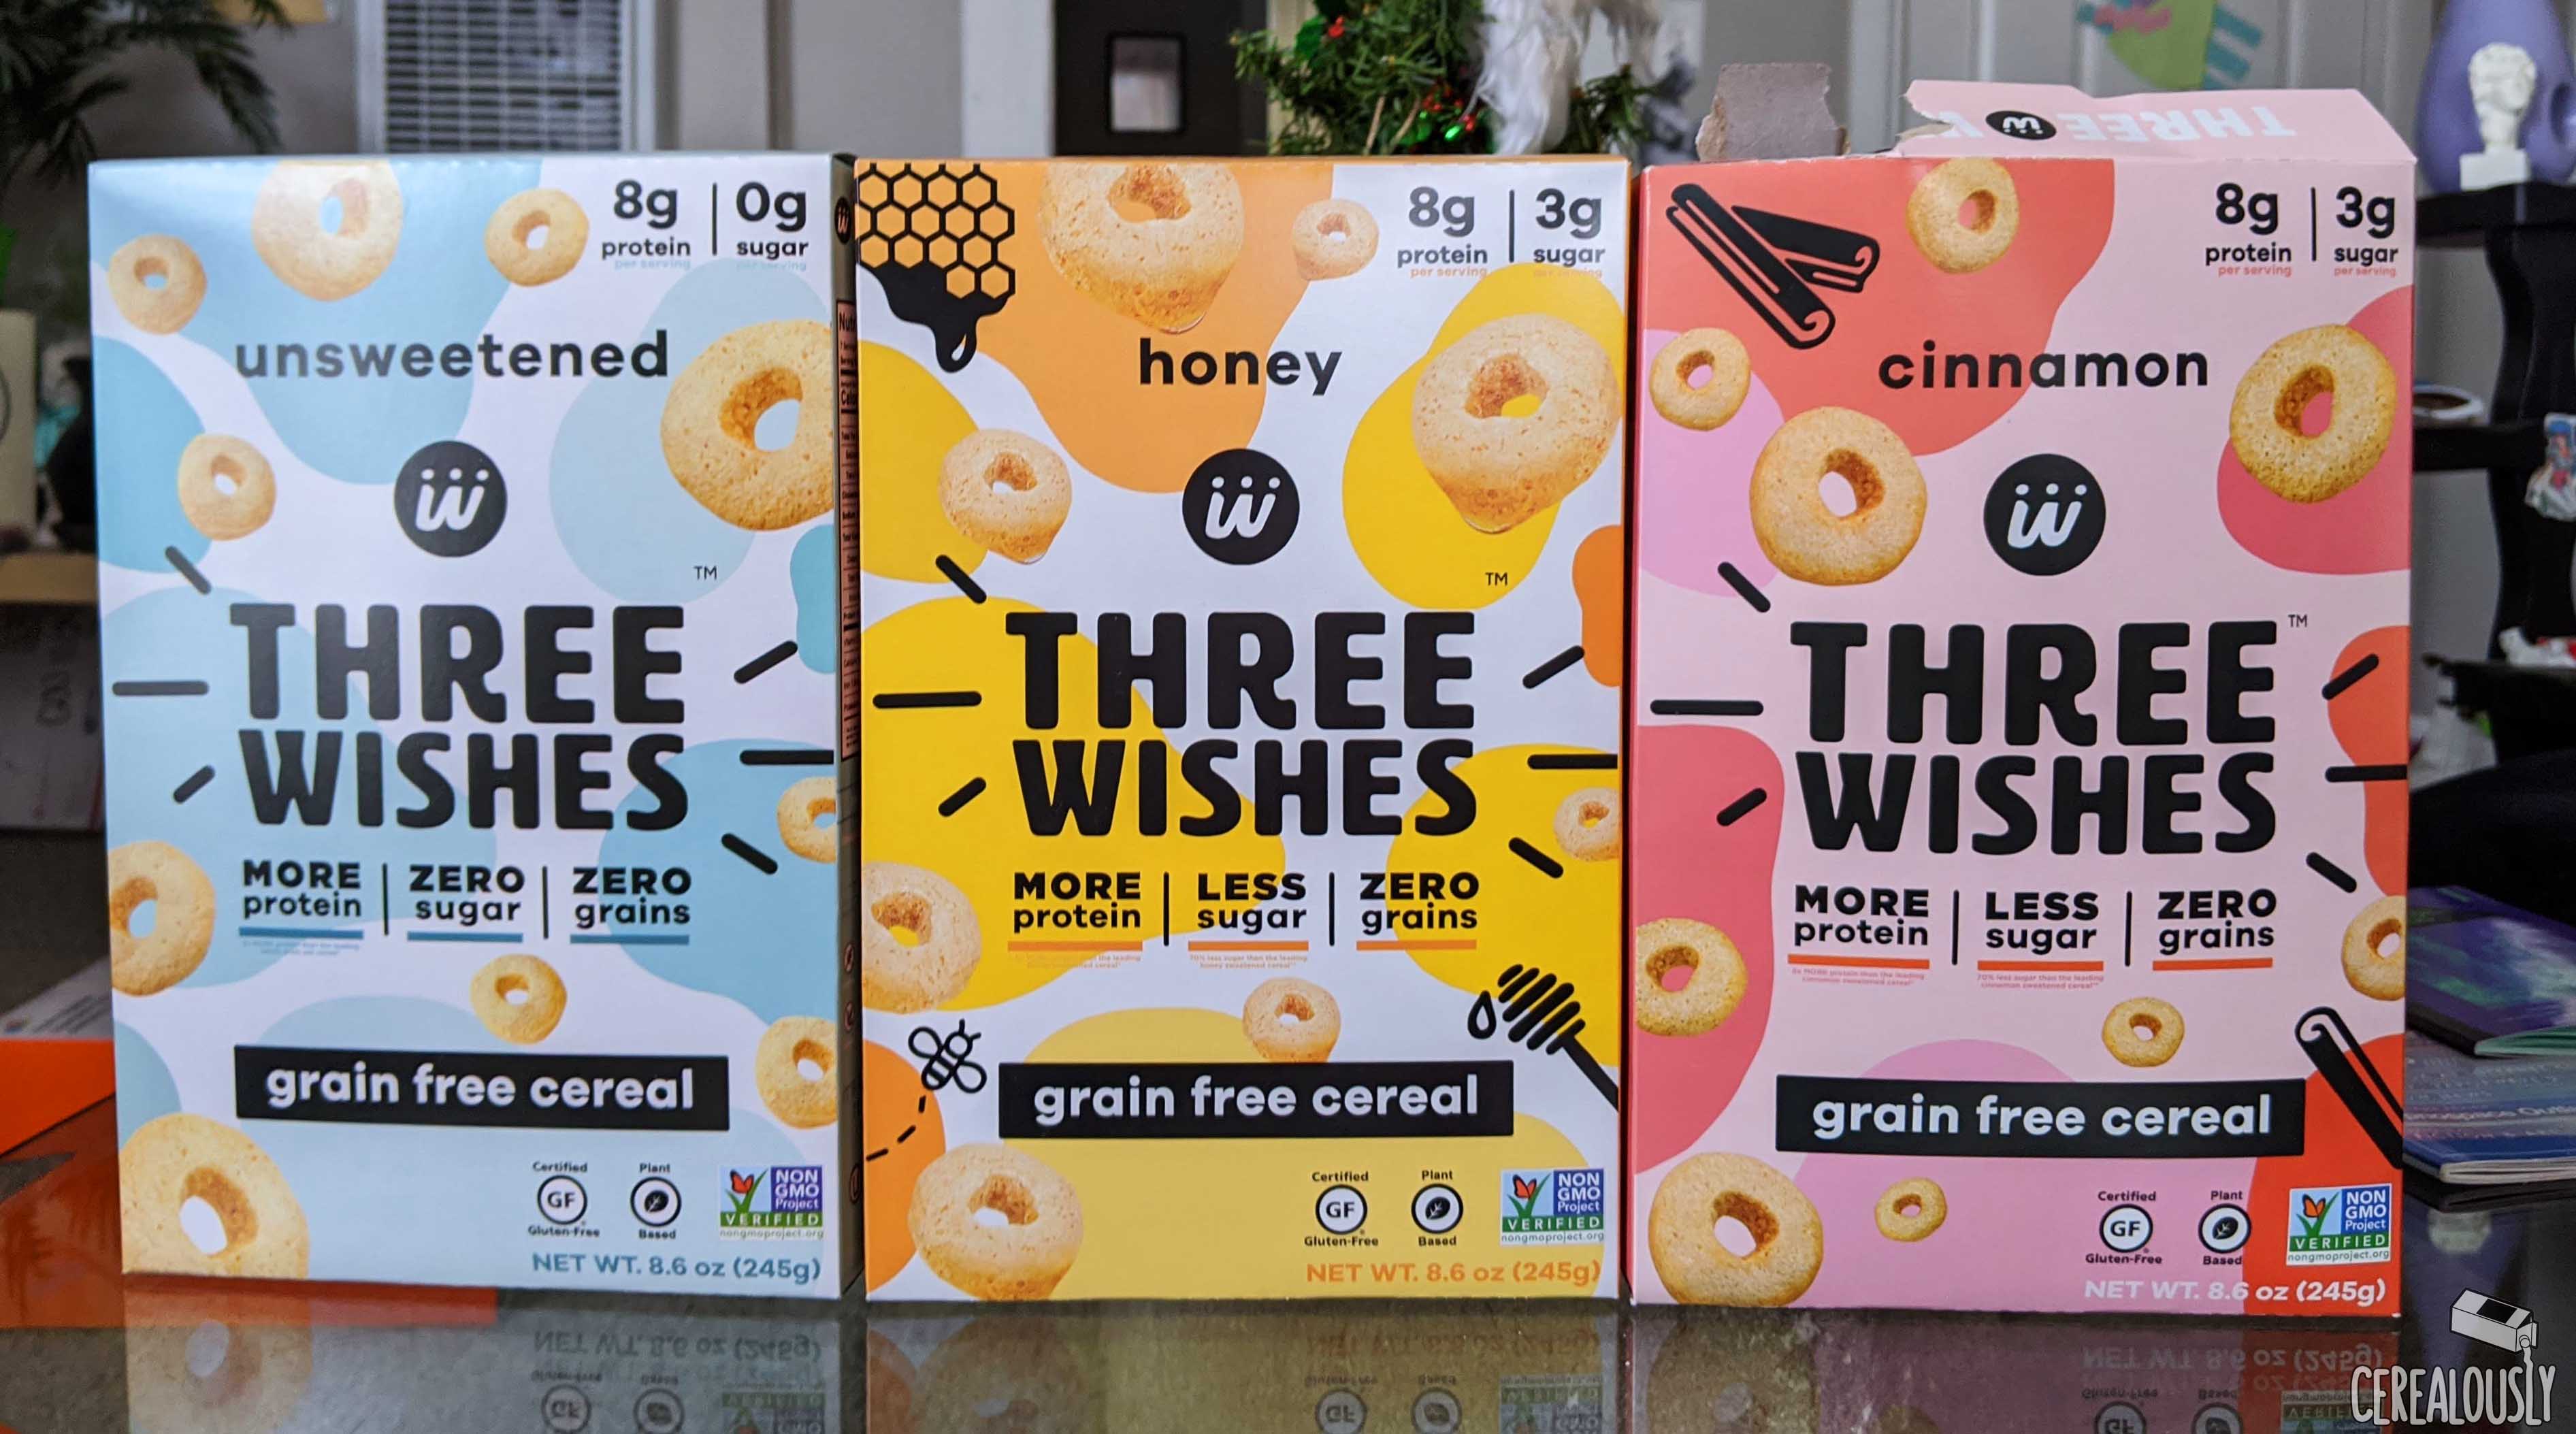 https://www.cerealously.net/wp-content/uploads/2019/12/grain-free-three-wishes-cereal-review-boxes.jpg